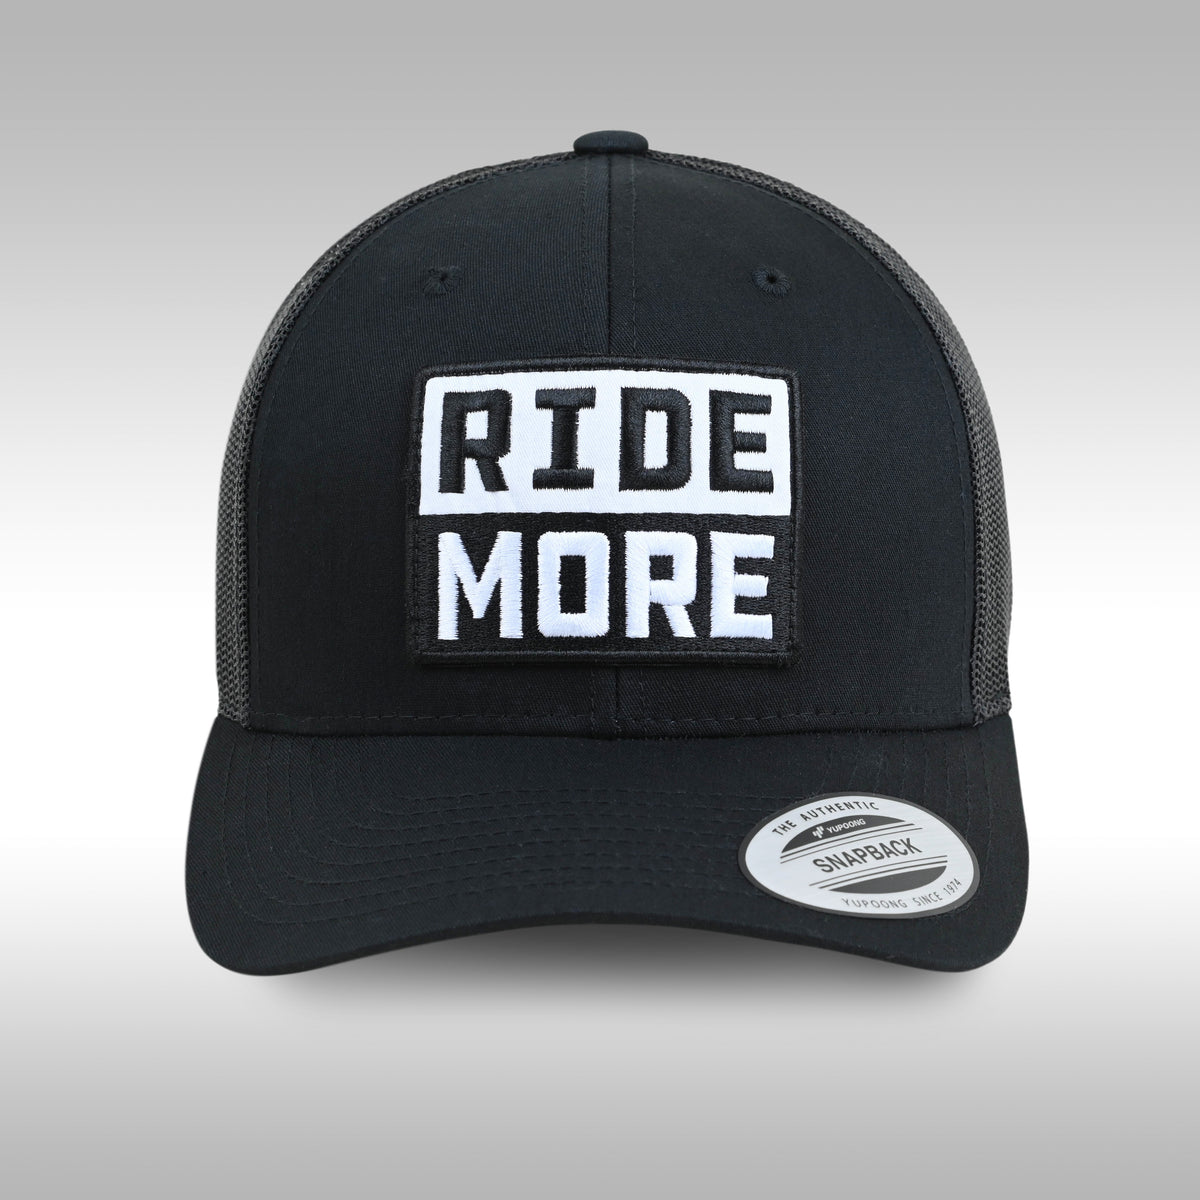 RIDE MORE HATS